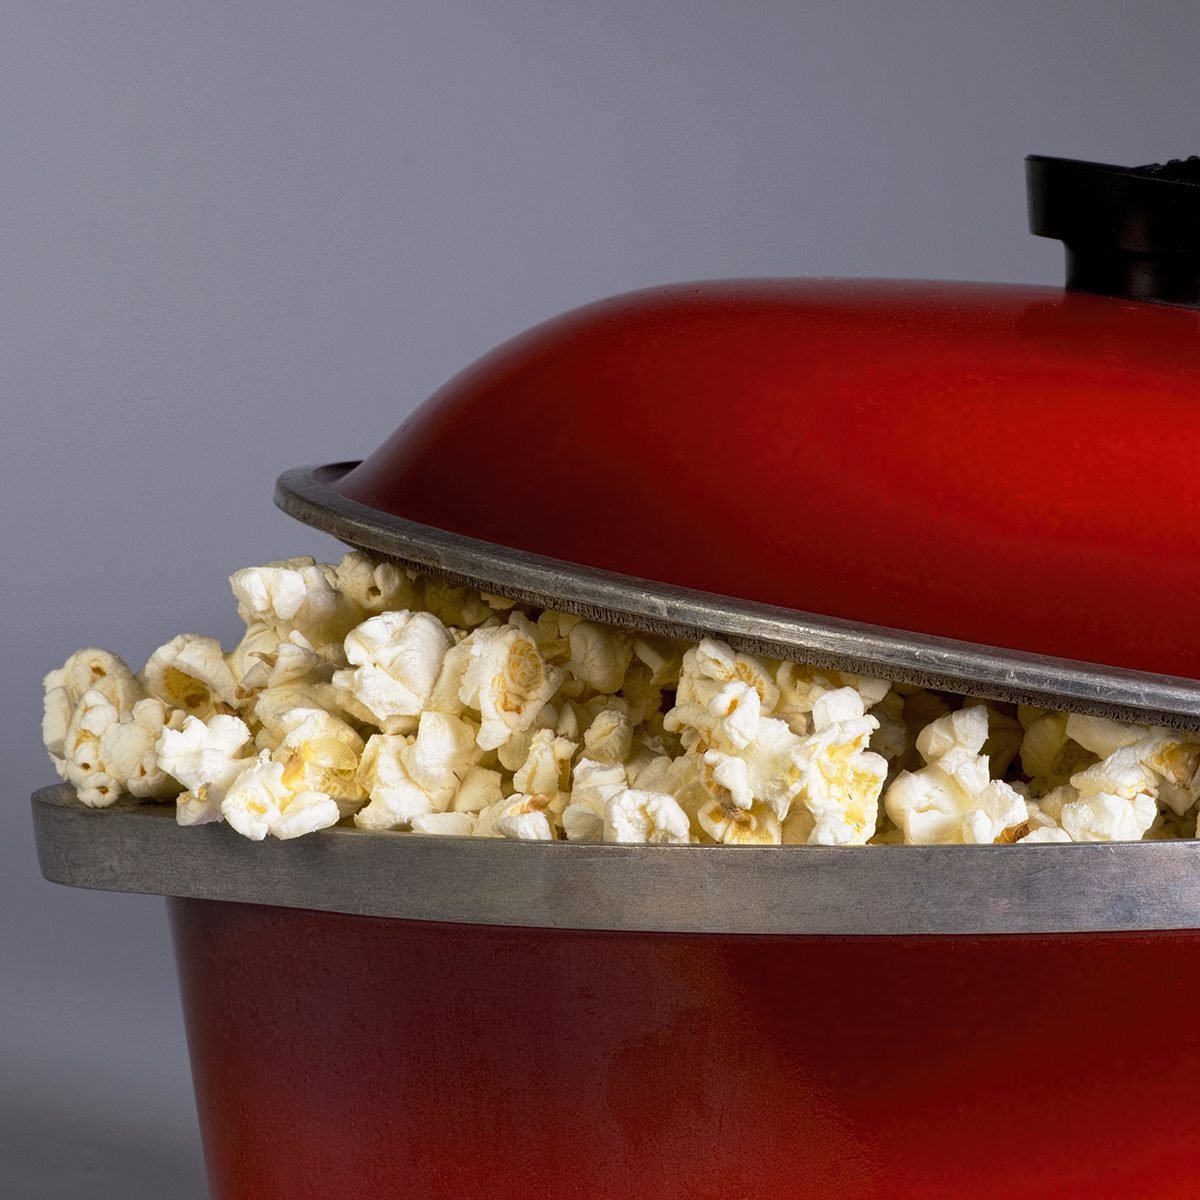 How to Make Popcorn on the Stove | Taste of Home